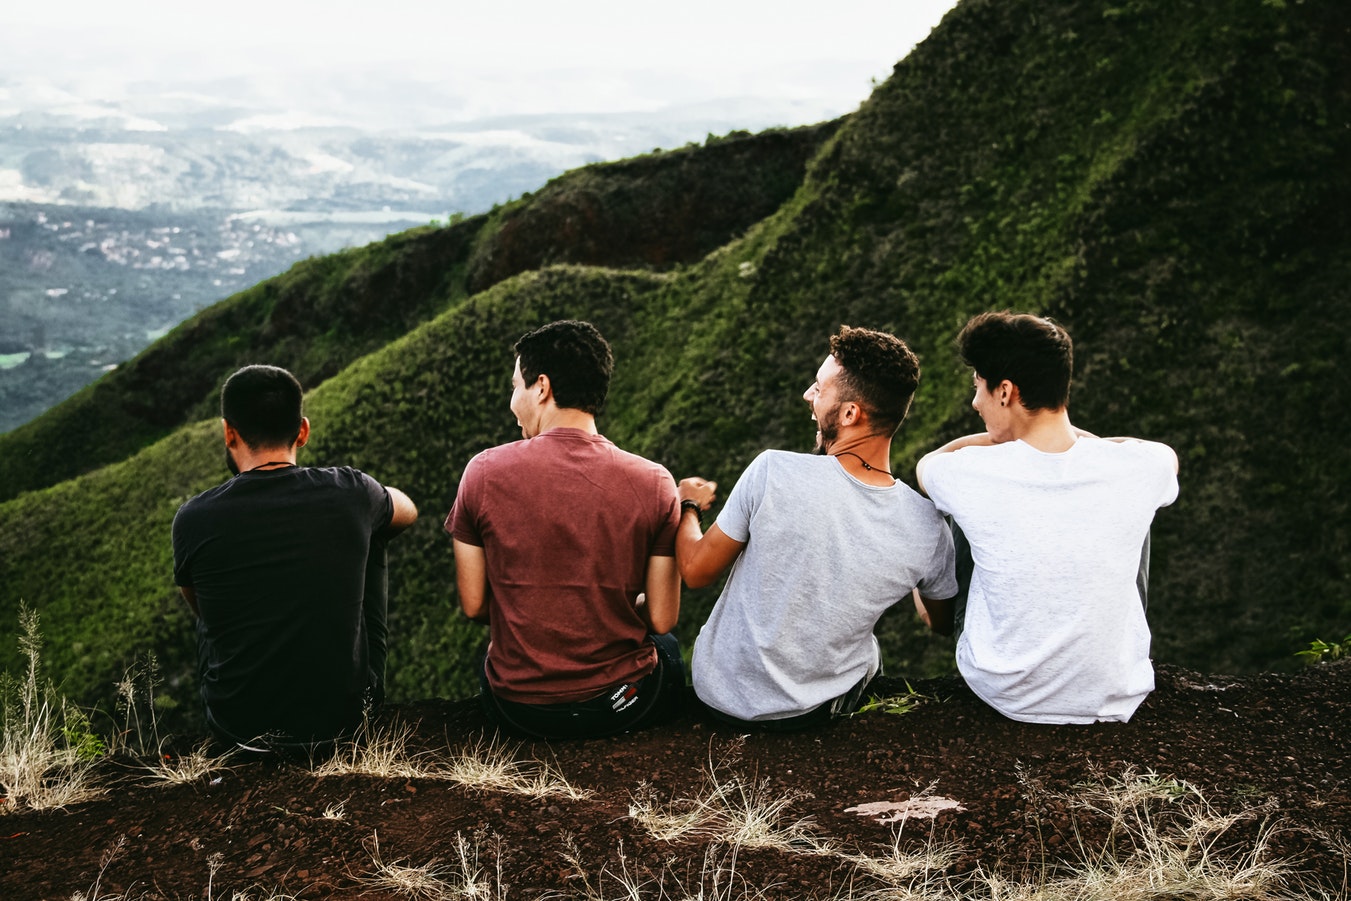 millennial men laughing on a hill side